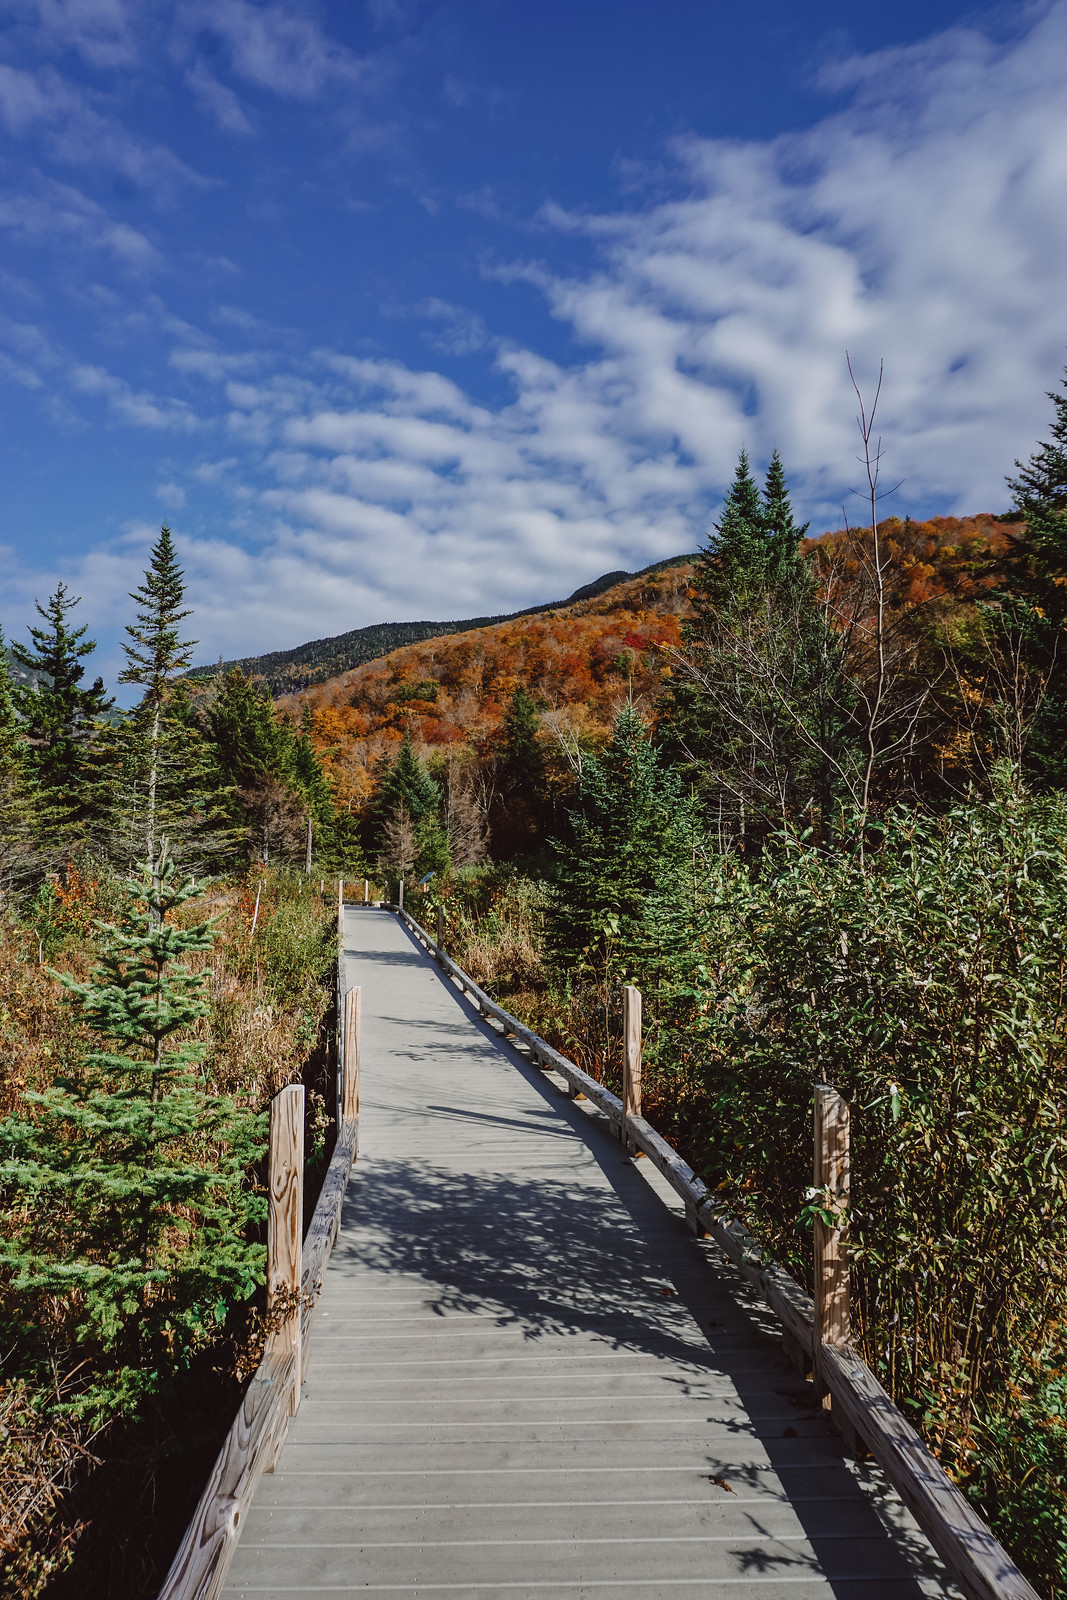 Stowe Mountain Resort | Stowe VT | My Complete Vermont Fall Travel Guide: What to See, Do & Eat | Ultimate Fall Guide to Vermont | 5 Day Vermont Road Trip | Fall Foliage Road Trip Guide